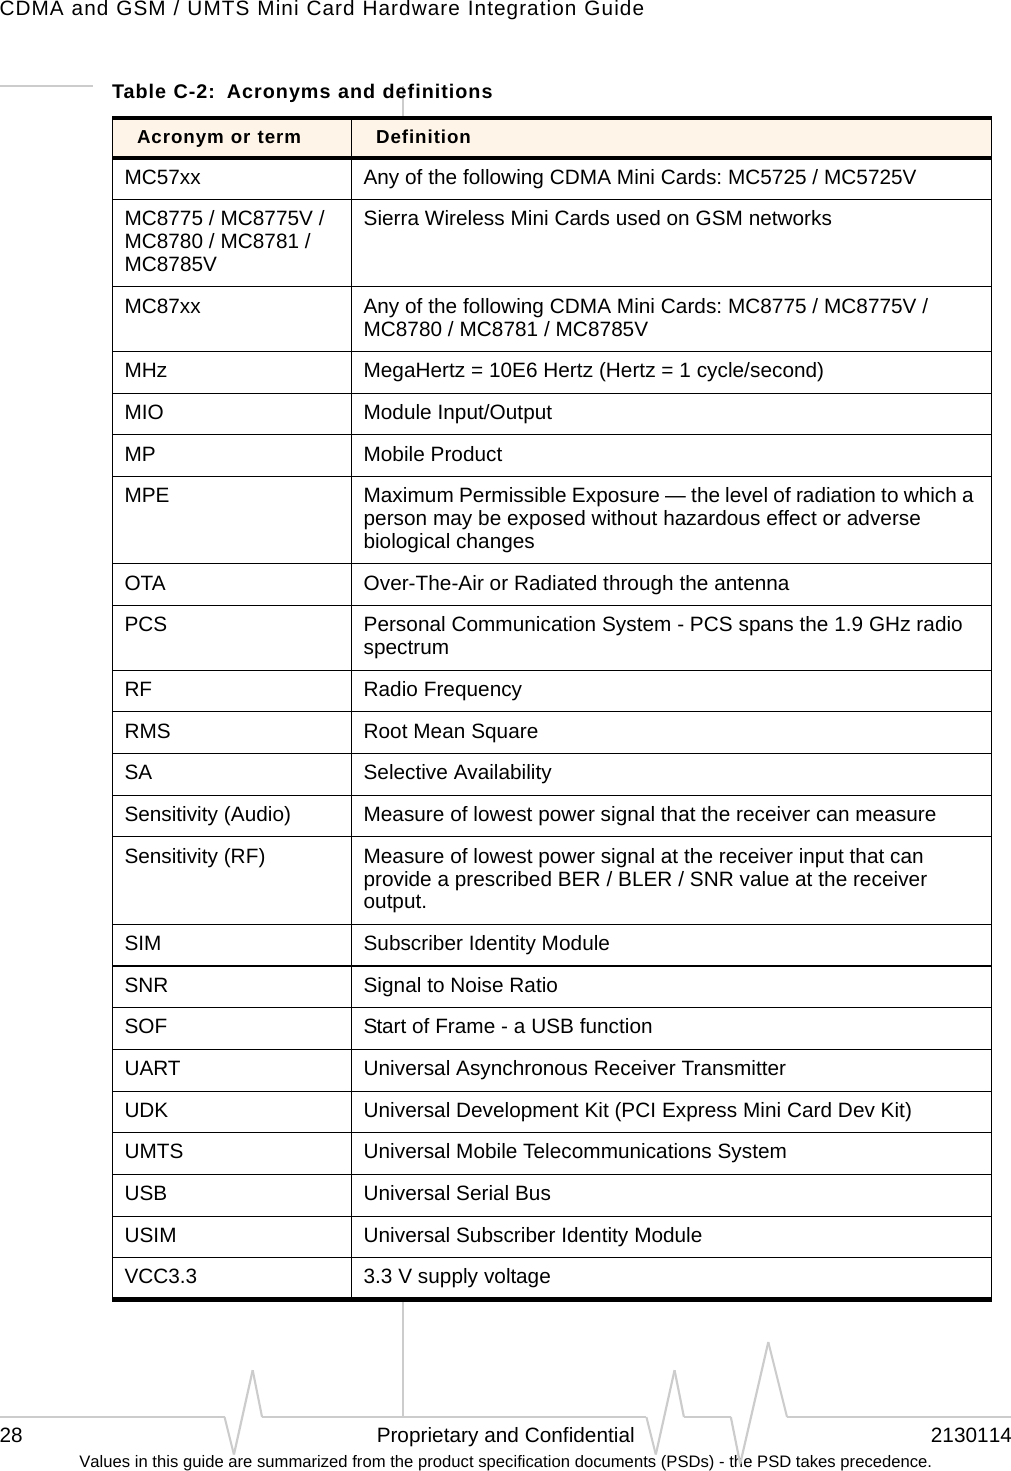 CDMA and GSM / UMTS Mini Card Hardware Integration Guide28 Proprietary and Confidential 2130114Values in this guide are summarized from the product specification documents (PSDs) - the PSD takes precedence.MC57xx Any of the following CDMA Mini Cards: MC5725 / MC5725VMC8775 / MC8775V / MC8780 / MC8781 / MC8785VSierra Wireless Mini Cards used on GSM networksMC87xx Any of the following CDMA Mini Cards: MC8775 / MC8775V / MC8780 / MC8781 / MC8785VMHz MegaHertz = 10E6 Hertz (Hertz = 1 cycle/second)MIO Module Input/OutputMP Mobile ProductMPE Maximum Permissible Exposure — the level of radiation to which a person may be exposed without hazardous effect or adverse biological changesOTA Over-The-Air or Radiated through the antennaPCS Personal Communication System - PCS spans the 1.9 GHz radio spectrumRF Radio FrequencyRMS Root Mean SquareSA Selective AvailabilitySensitivity (Audio) Measure of lowest power signal that the receiver can measureSensitivity (RF) Measure of lowest power signal at the receiver input that can provide a prescribed BER / BLER / SNR value at the receiver output.SIM Subscriber Identity ModuleSNR Signal to Noise RatioSOF Start of Frame - a USB functionUART Universal Asynchronous Receiver TransmitterUDK Universal Development Kit (PCI Express Mini Card Dev Kit)UMTS Universal Mobile Telecommunications SystemUSB Universal Serial BusUSIM Universal Subscriber Identity ModuleVCC3.3 3.3 V supply voltageTable C-2:  Acronyms and definitionsAcronym or term Definition